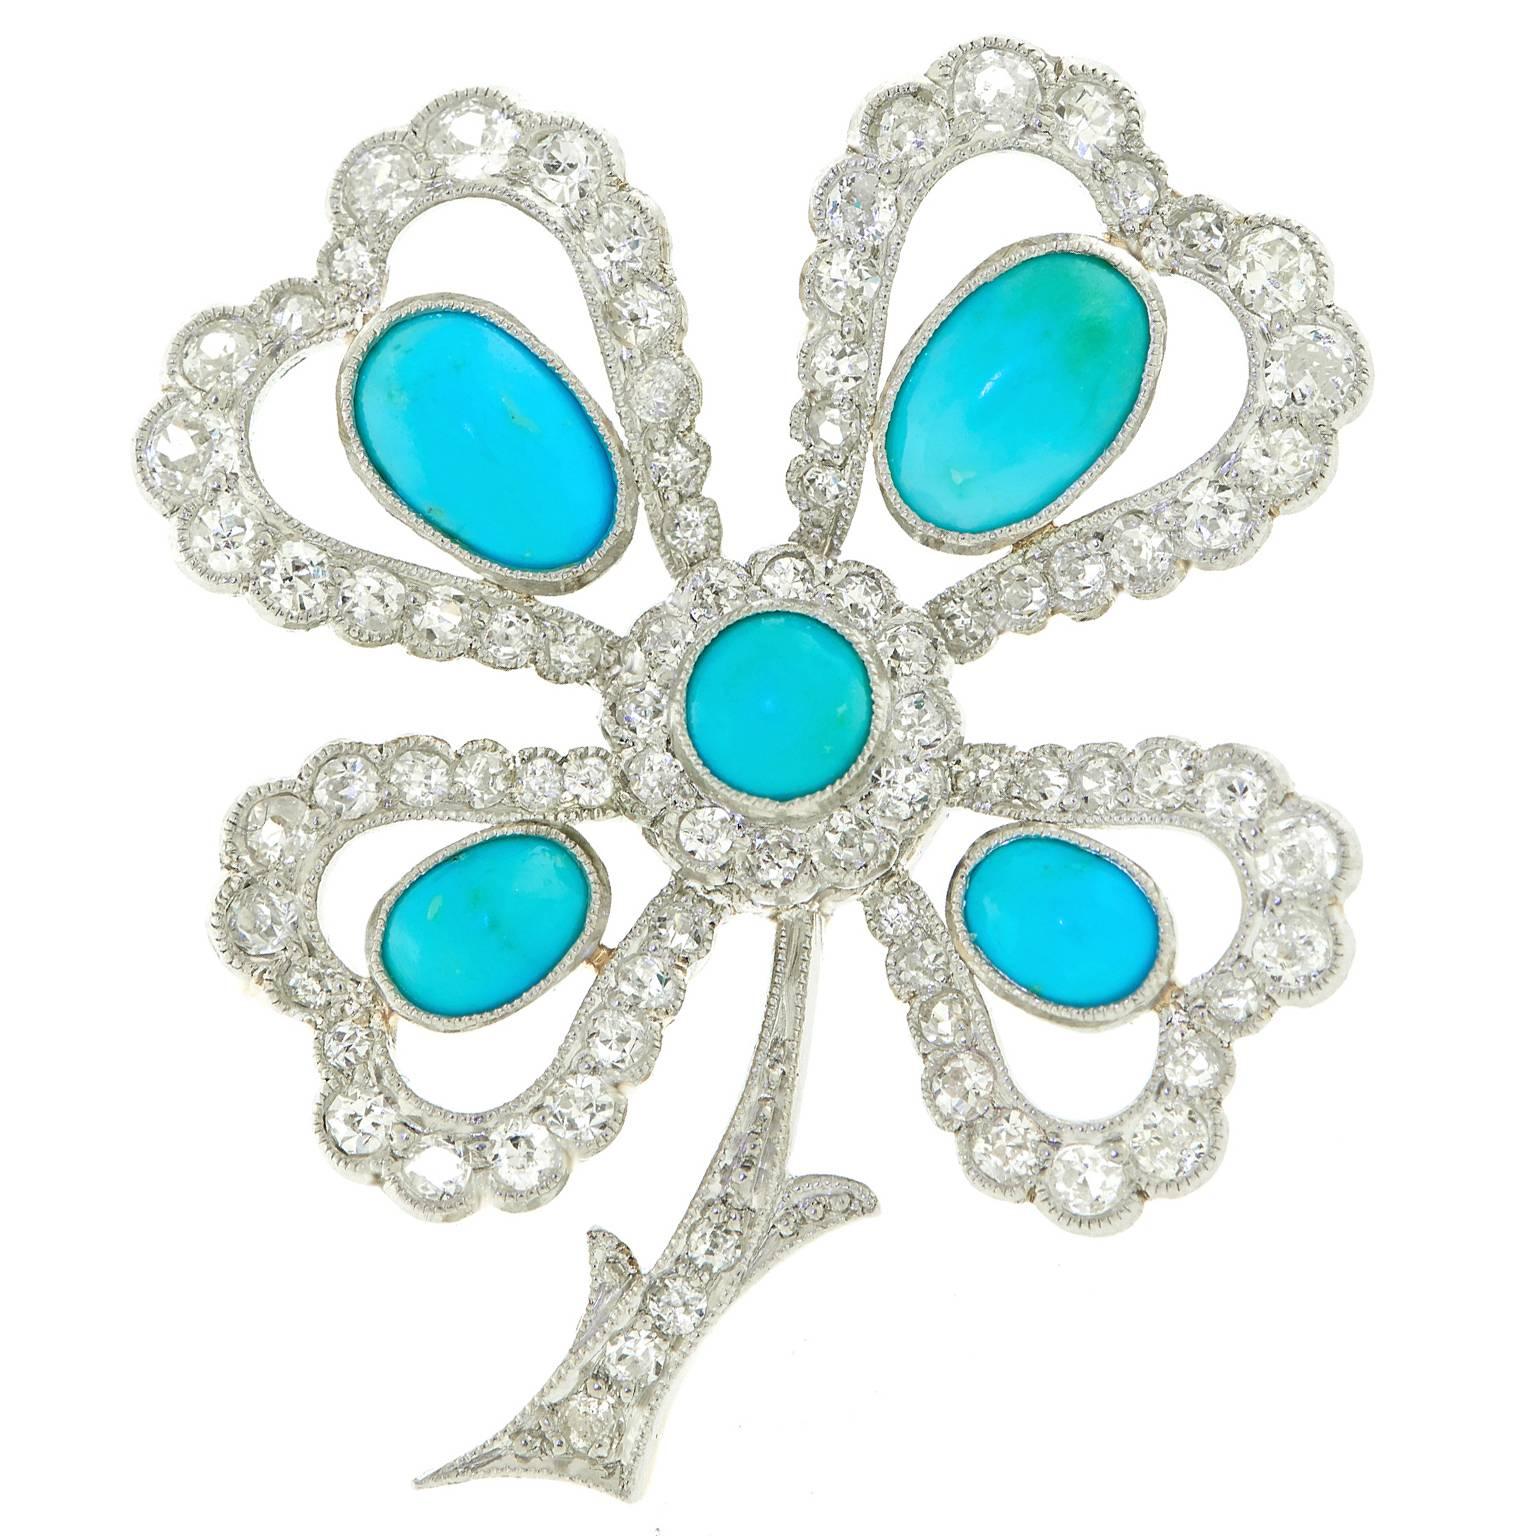 Antique Persian Turquoise and Diamond Clover Brooch